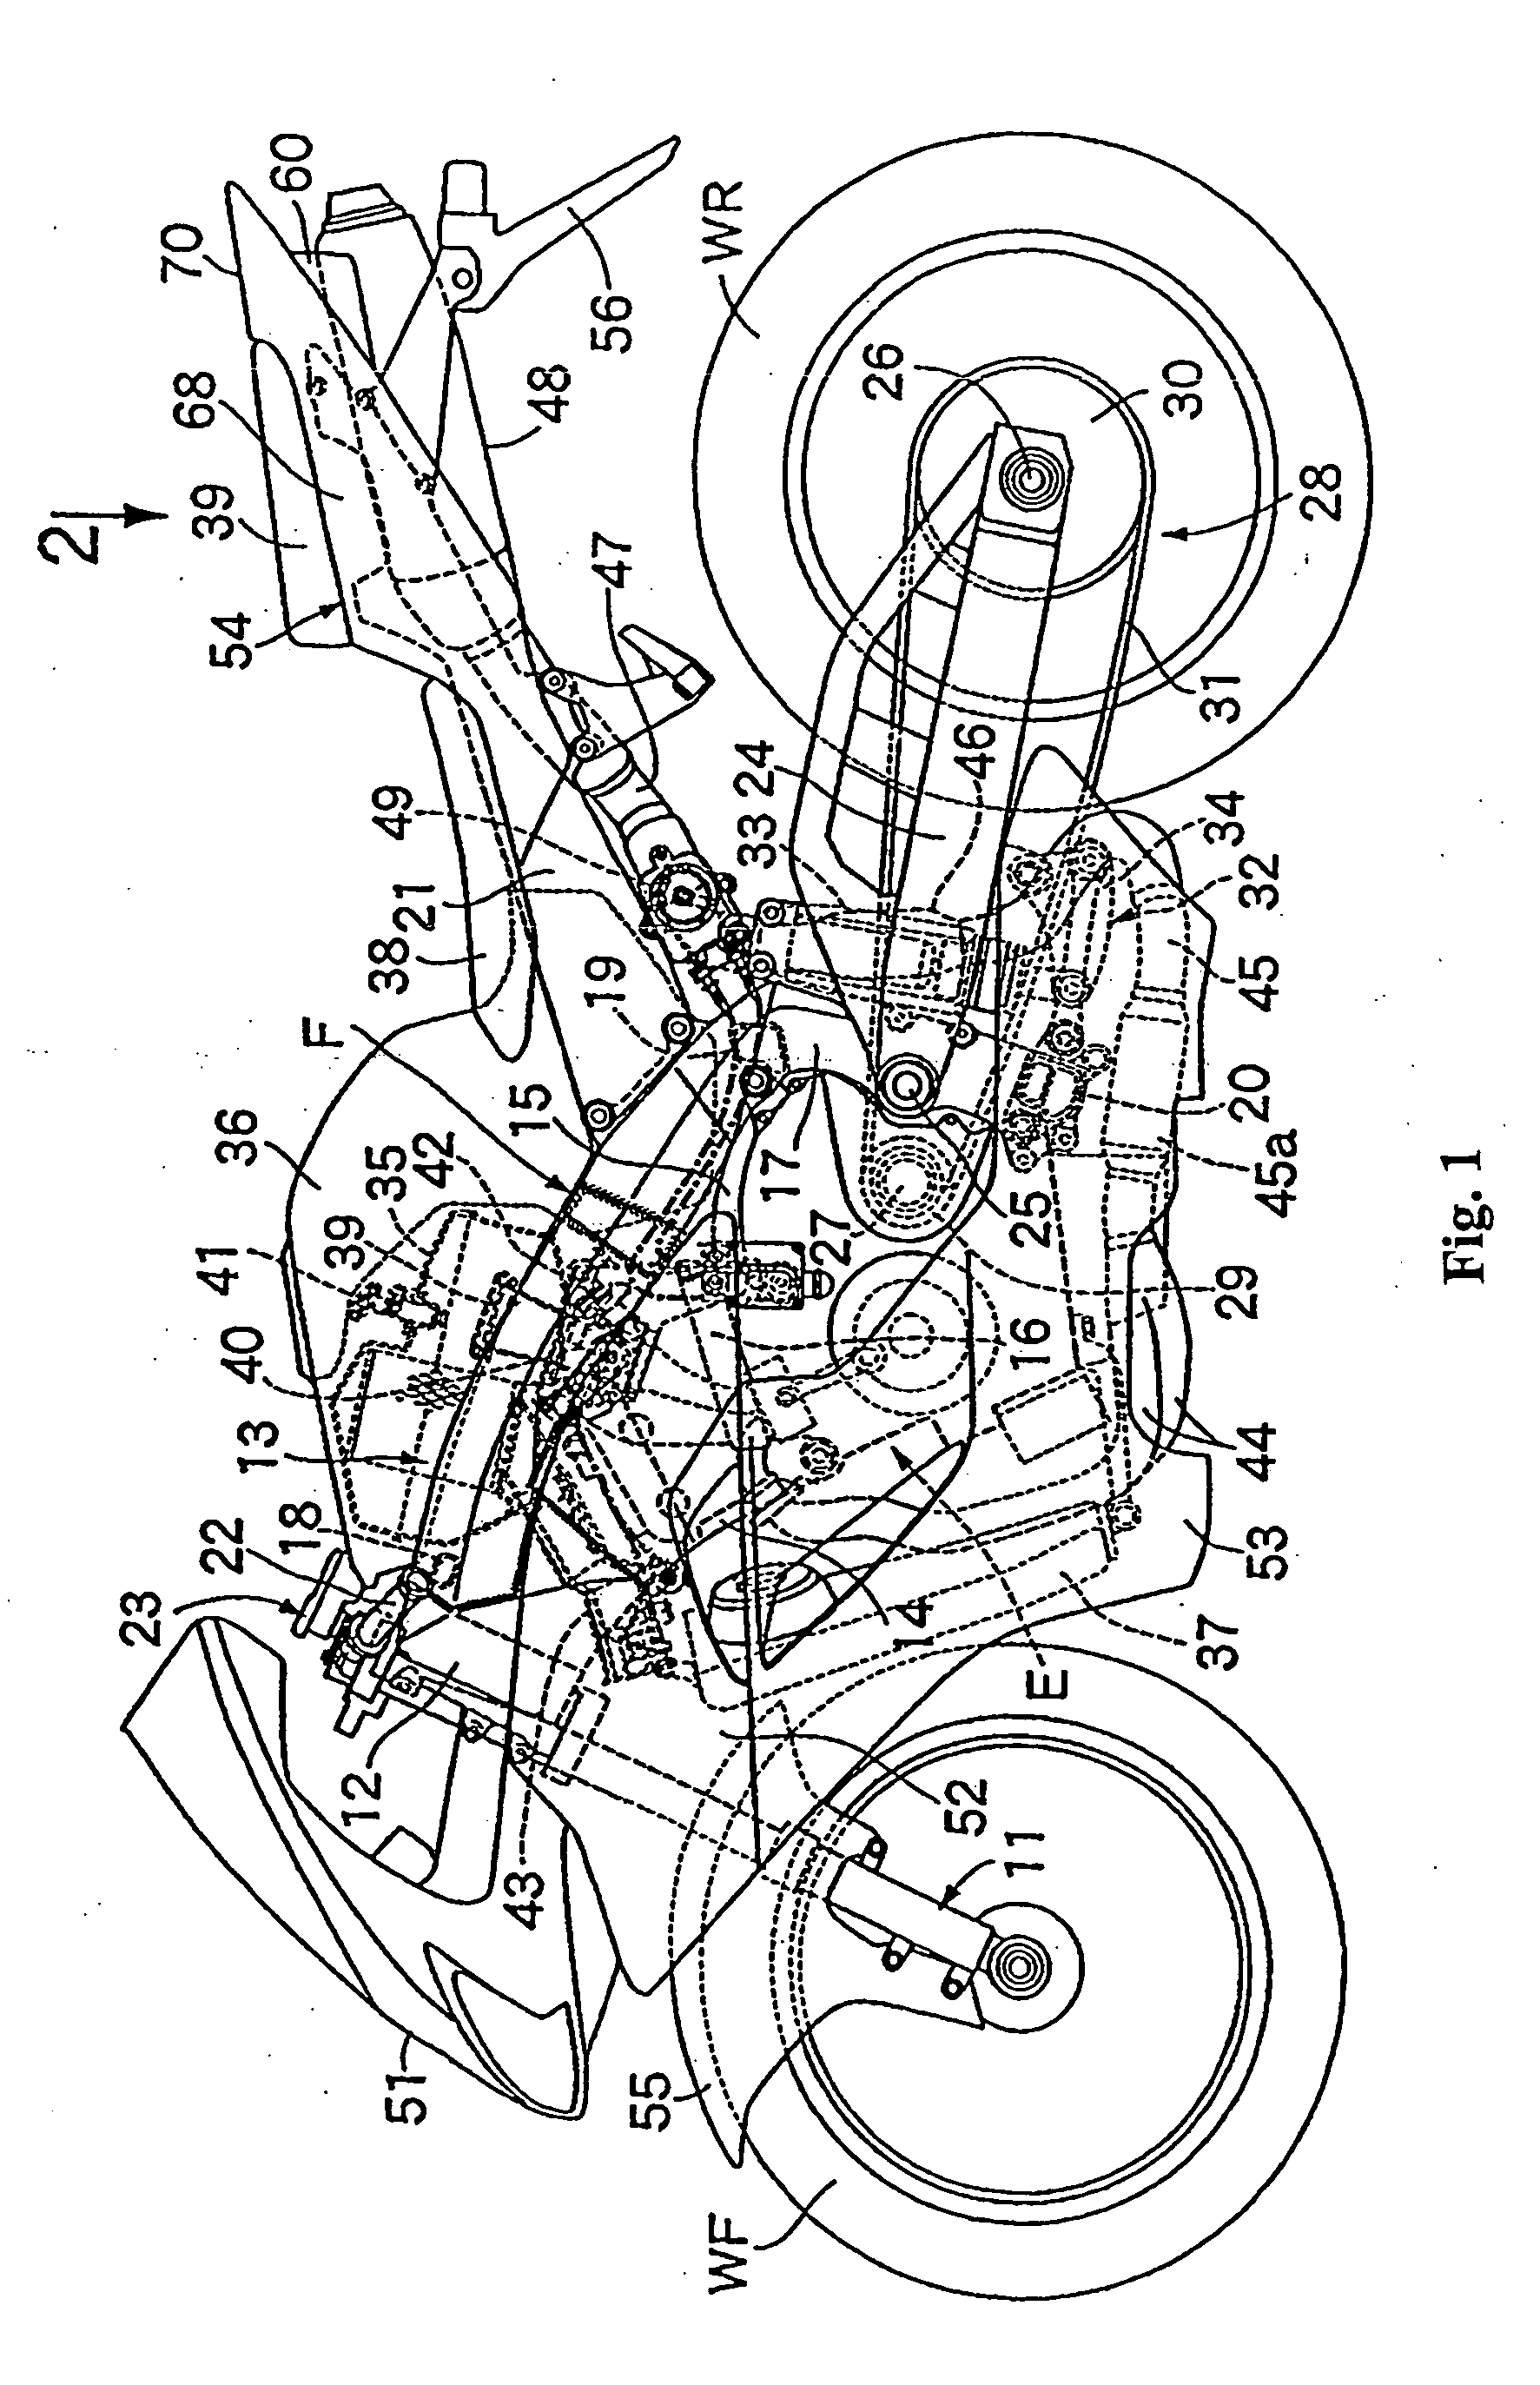 U-shaped locking anti-theft tool storage and support structure in vehicle